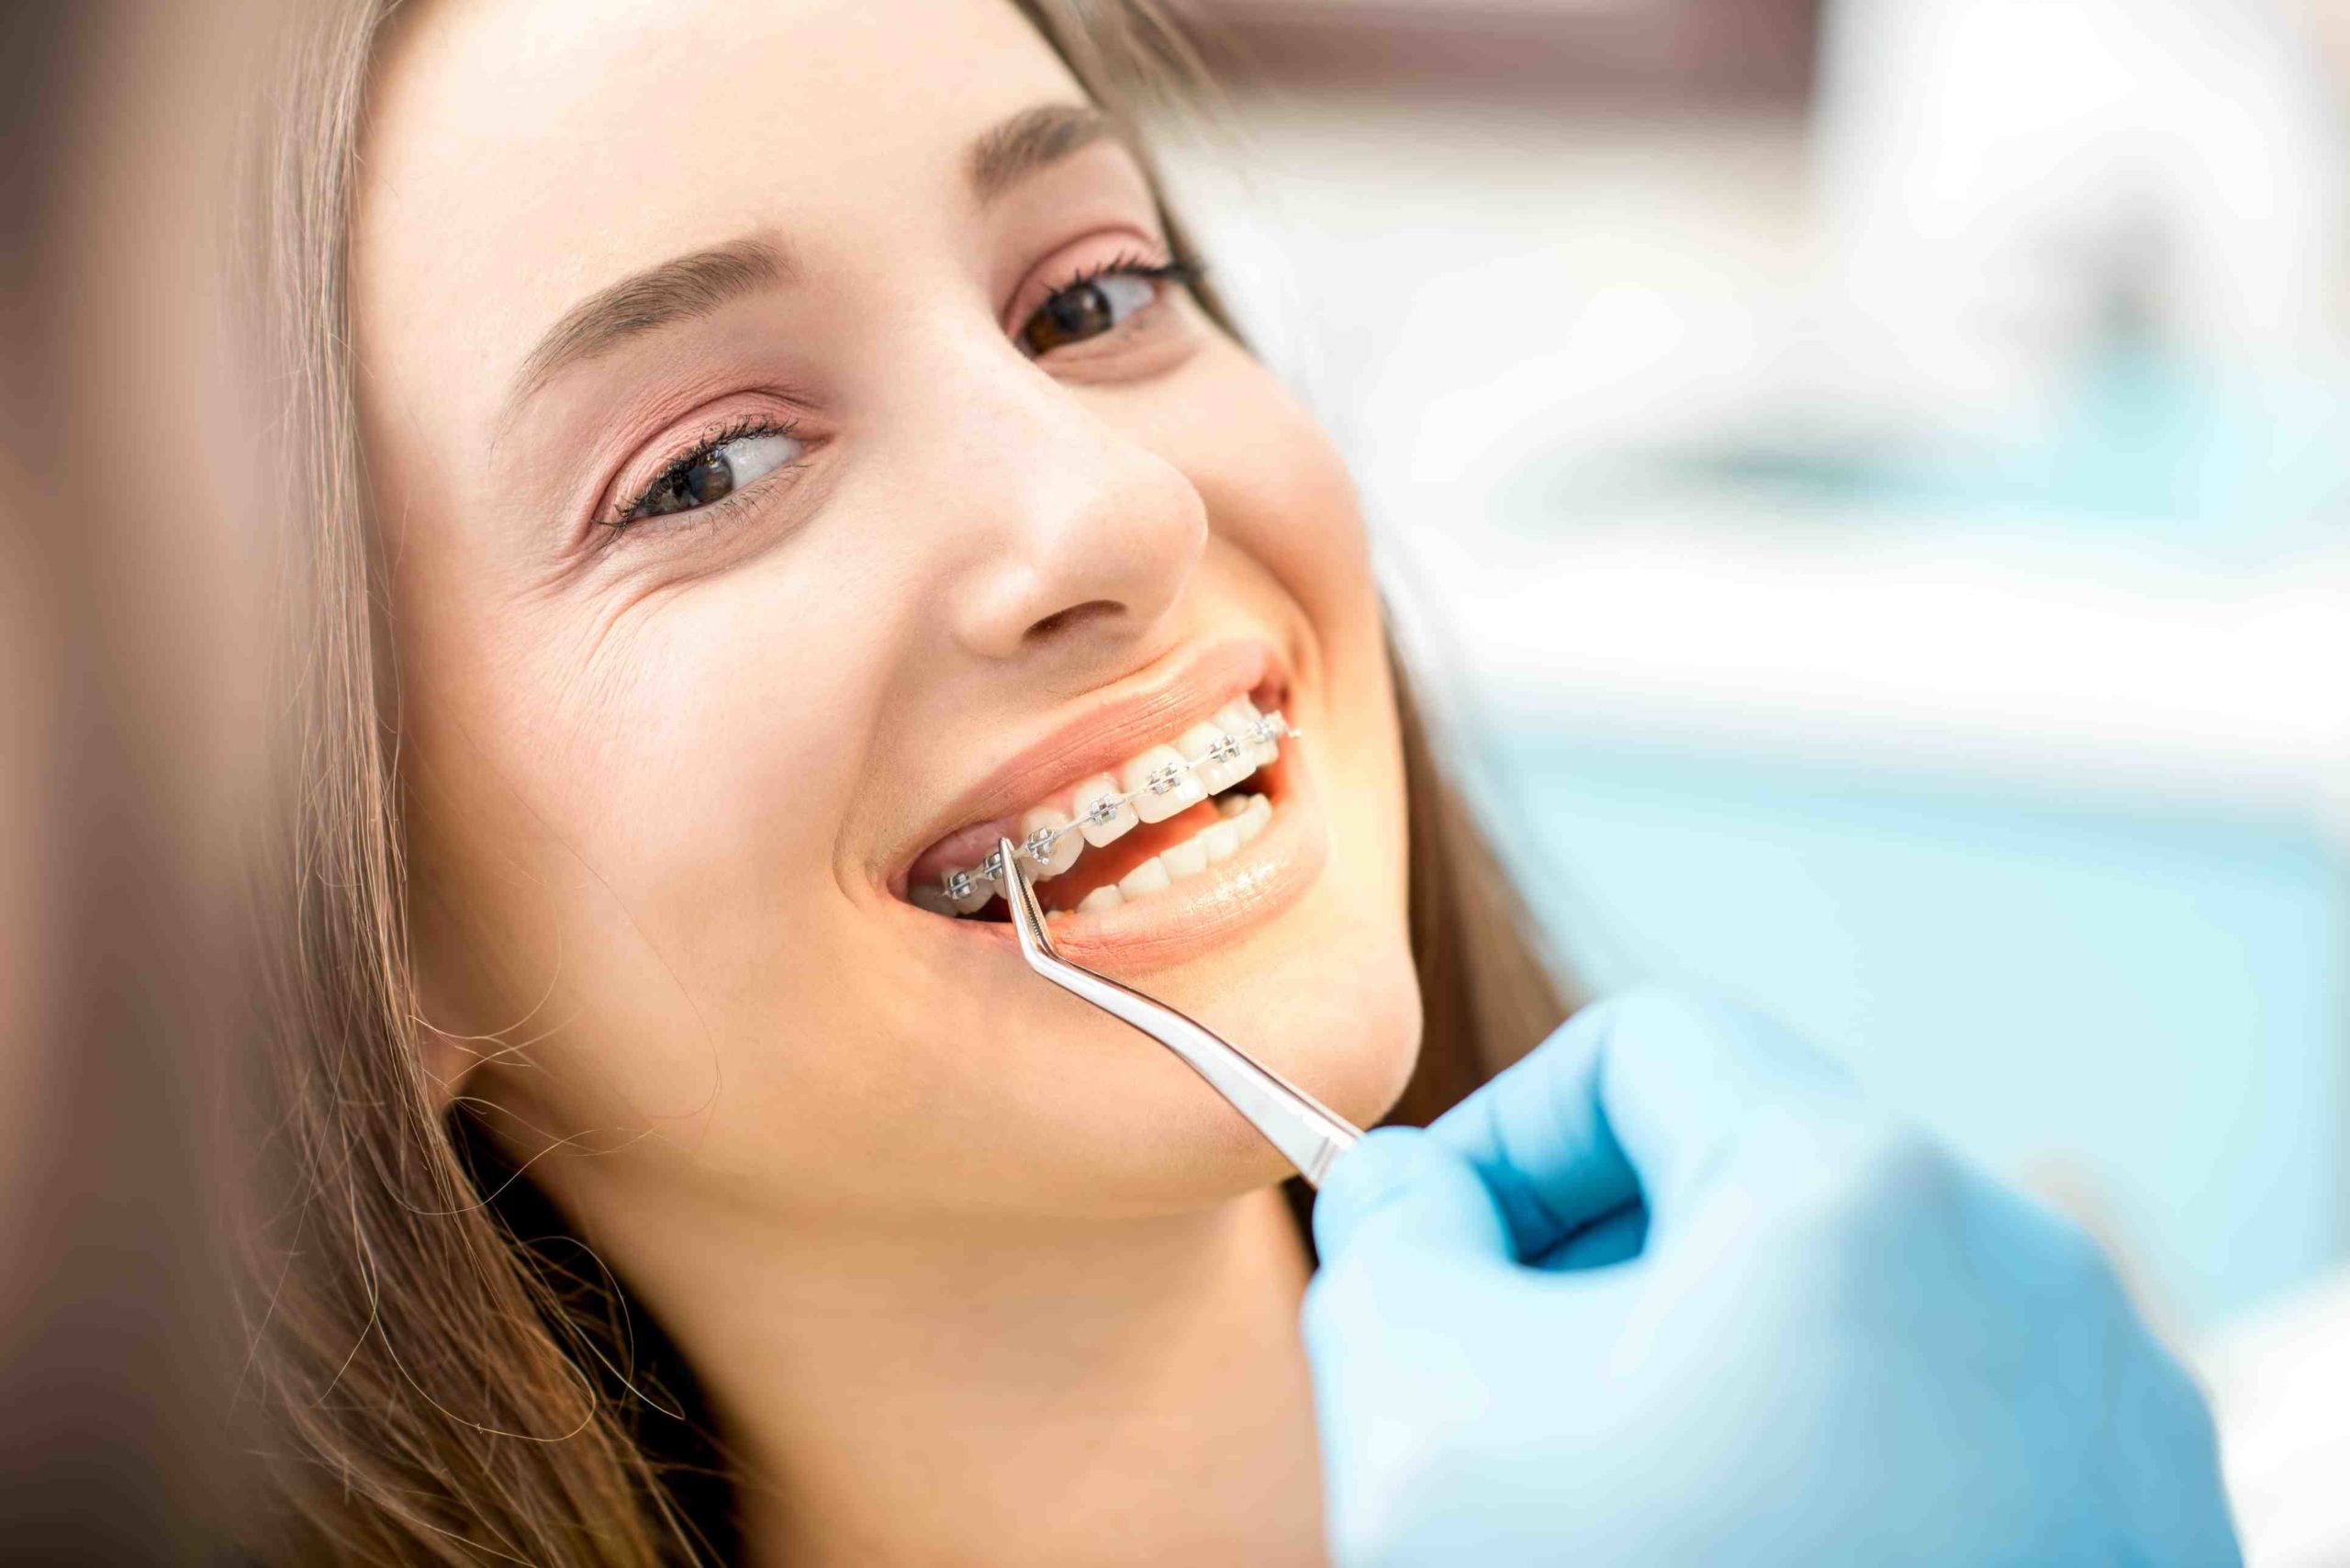 How do I find the best dentist in my area?